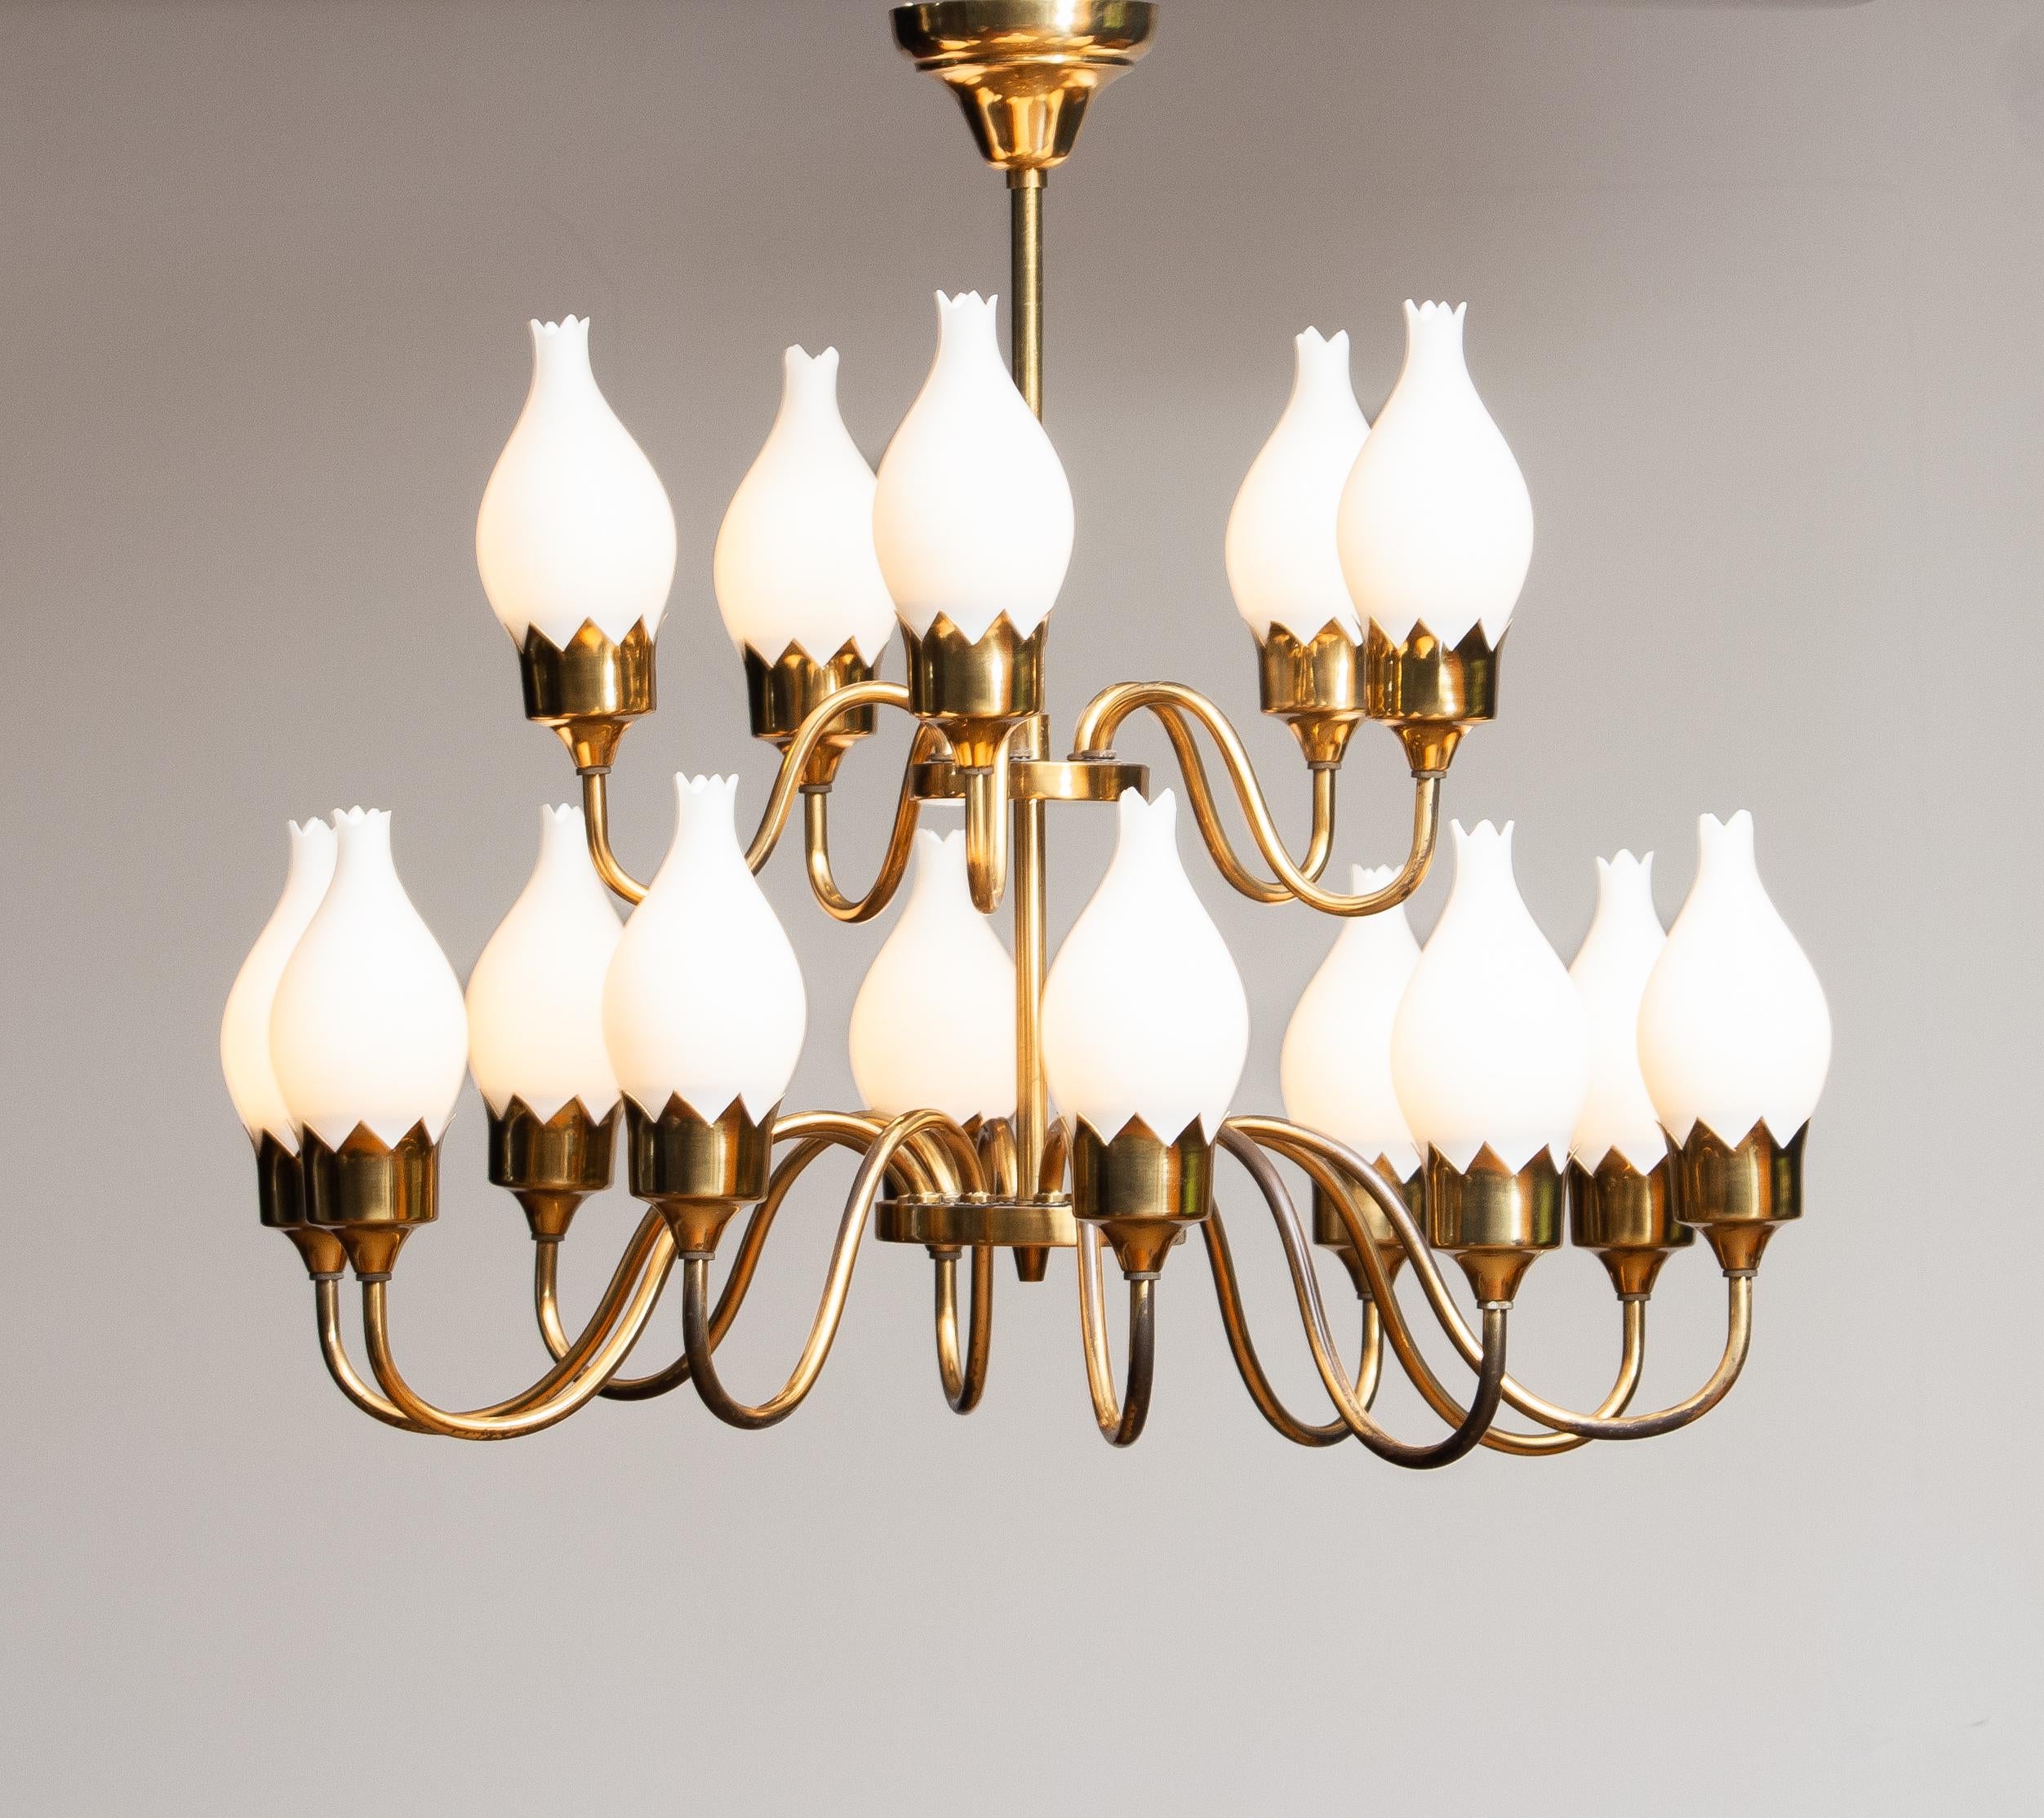 Danish 1950s, Brass and White Glass Opaline Arm Chandelier by Fog & Mørup with Tulips